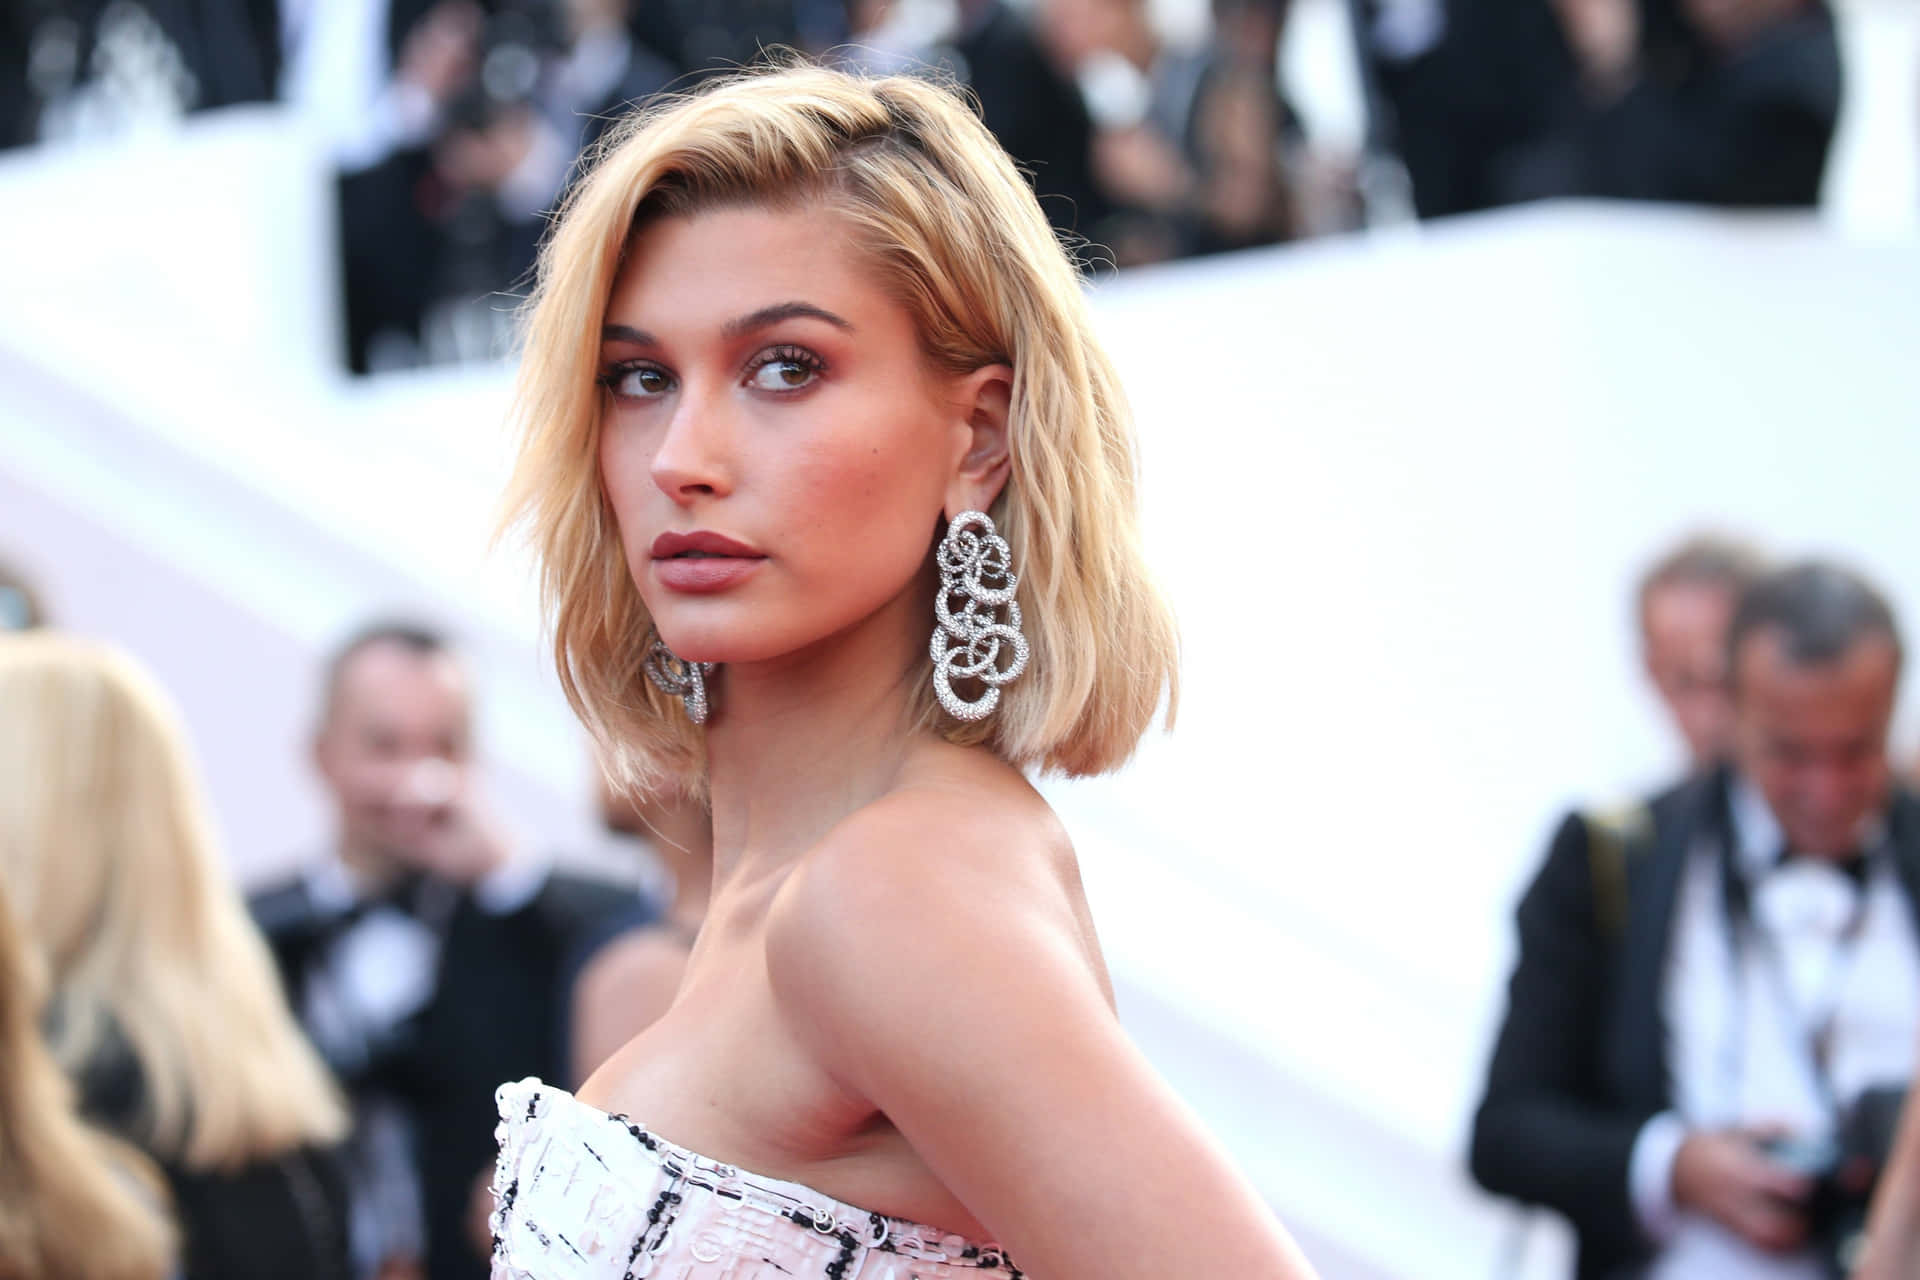 Hailey Baldwin Expressively Posing In A Chic Outfit Wallpaper